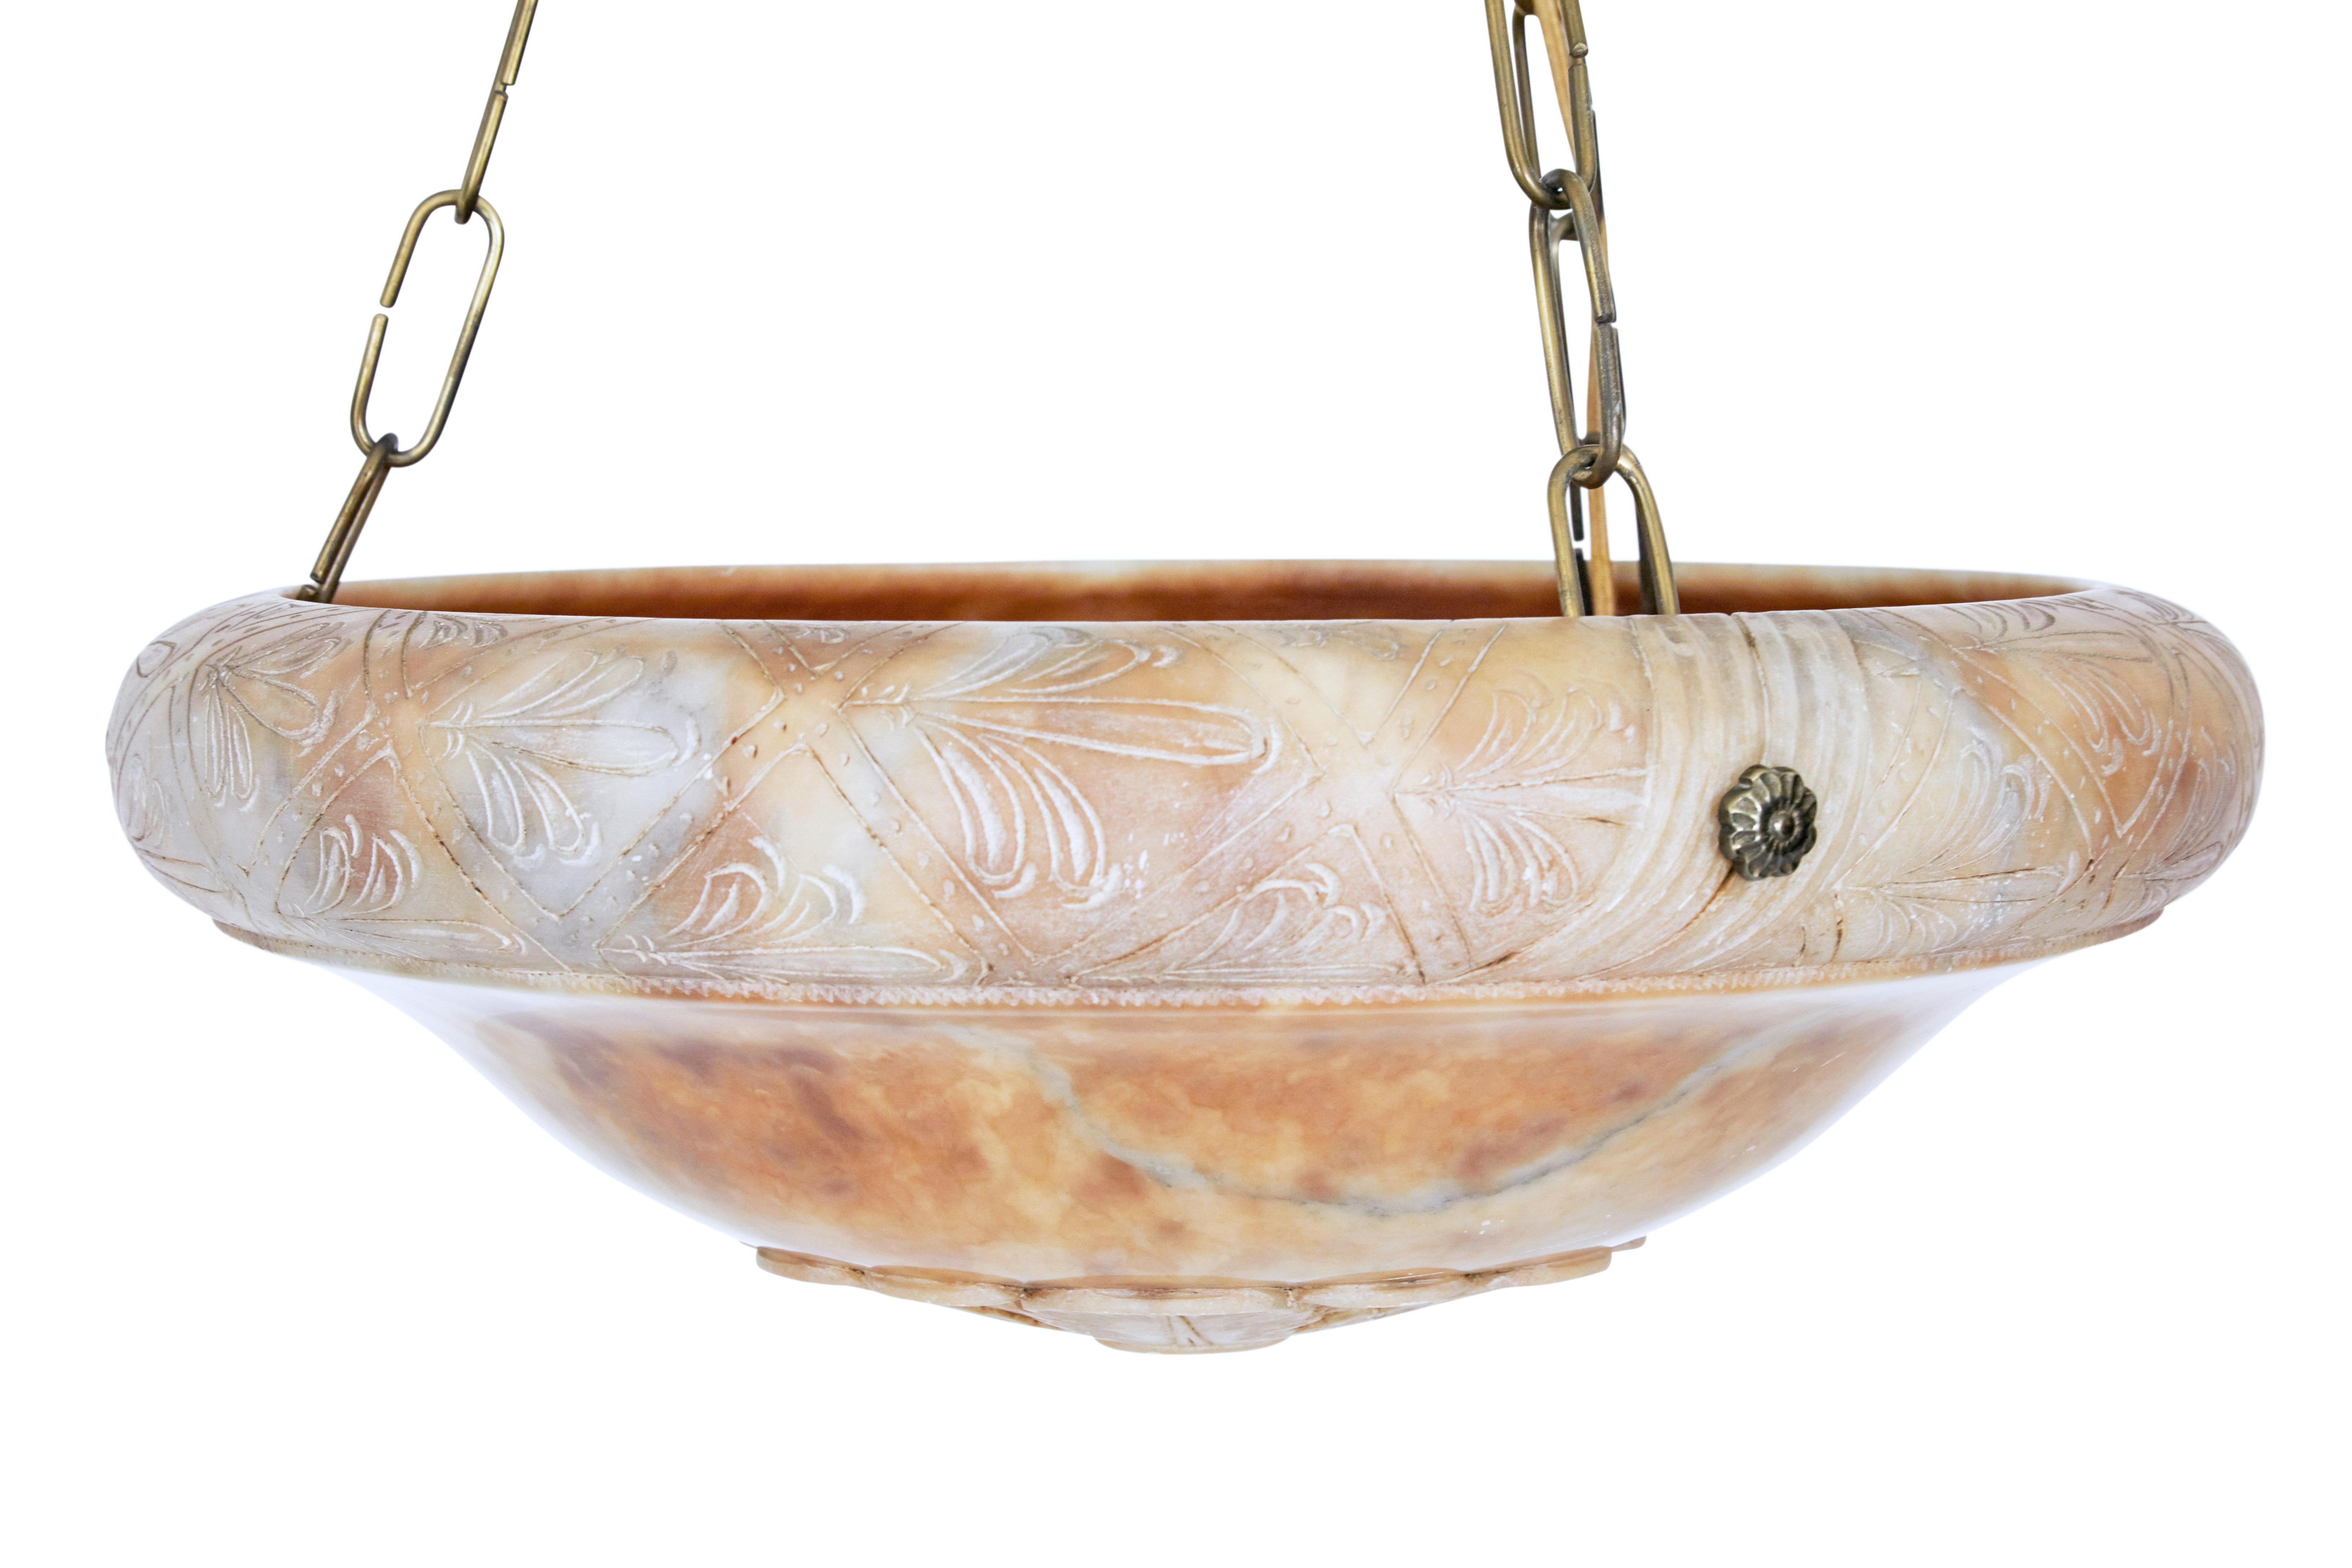 Beautiful carved alabaster chandelier, circa 1930.

Circular alabaster bowl with intricately carved edge and carved flower to the base of the bowl. Supported by 3 brass chains which lead up to a matching alabaster ceiling rose.

Fitted with 3